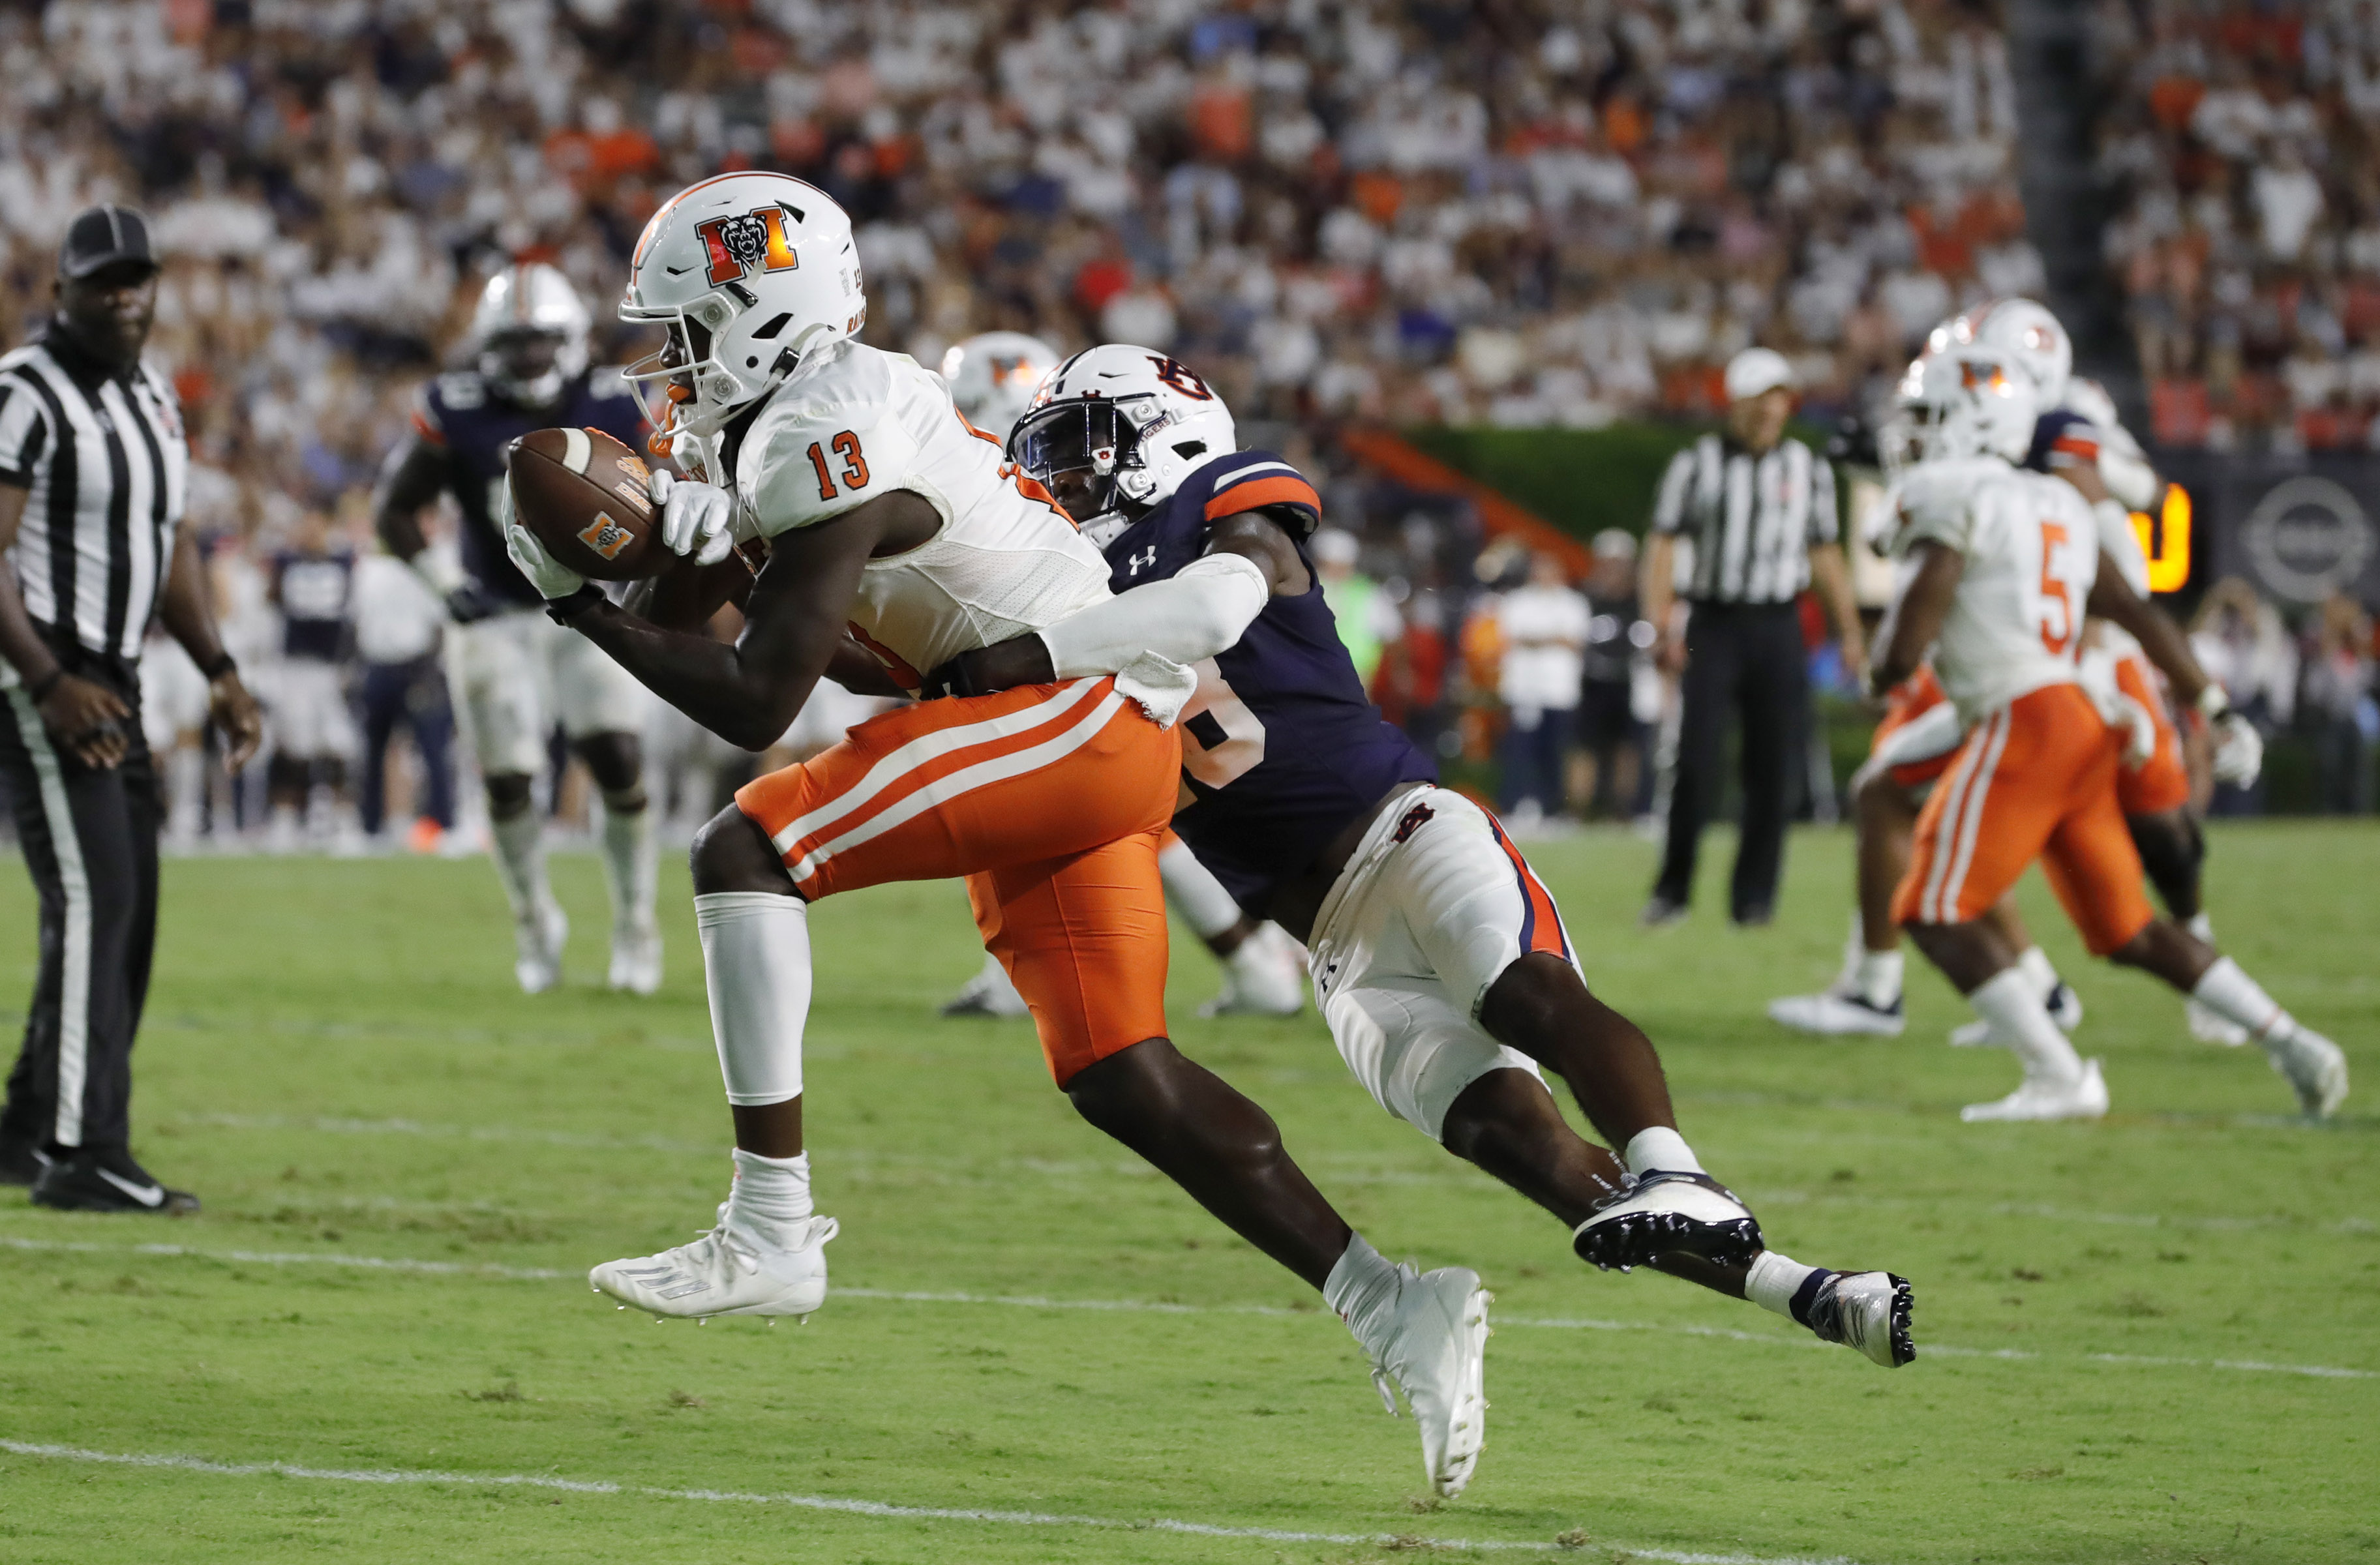 Mercer Bears receiver Ty James makes a contested catch versus the Auburn Tigers.